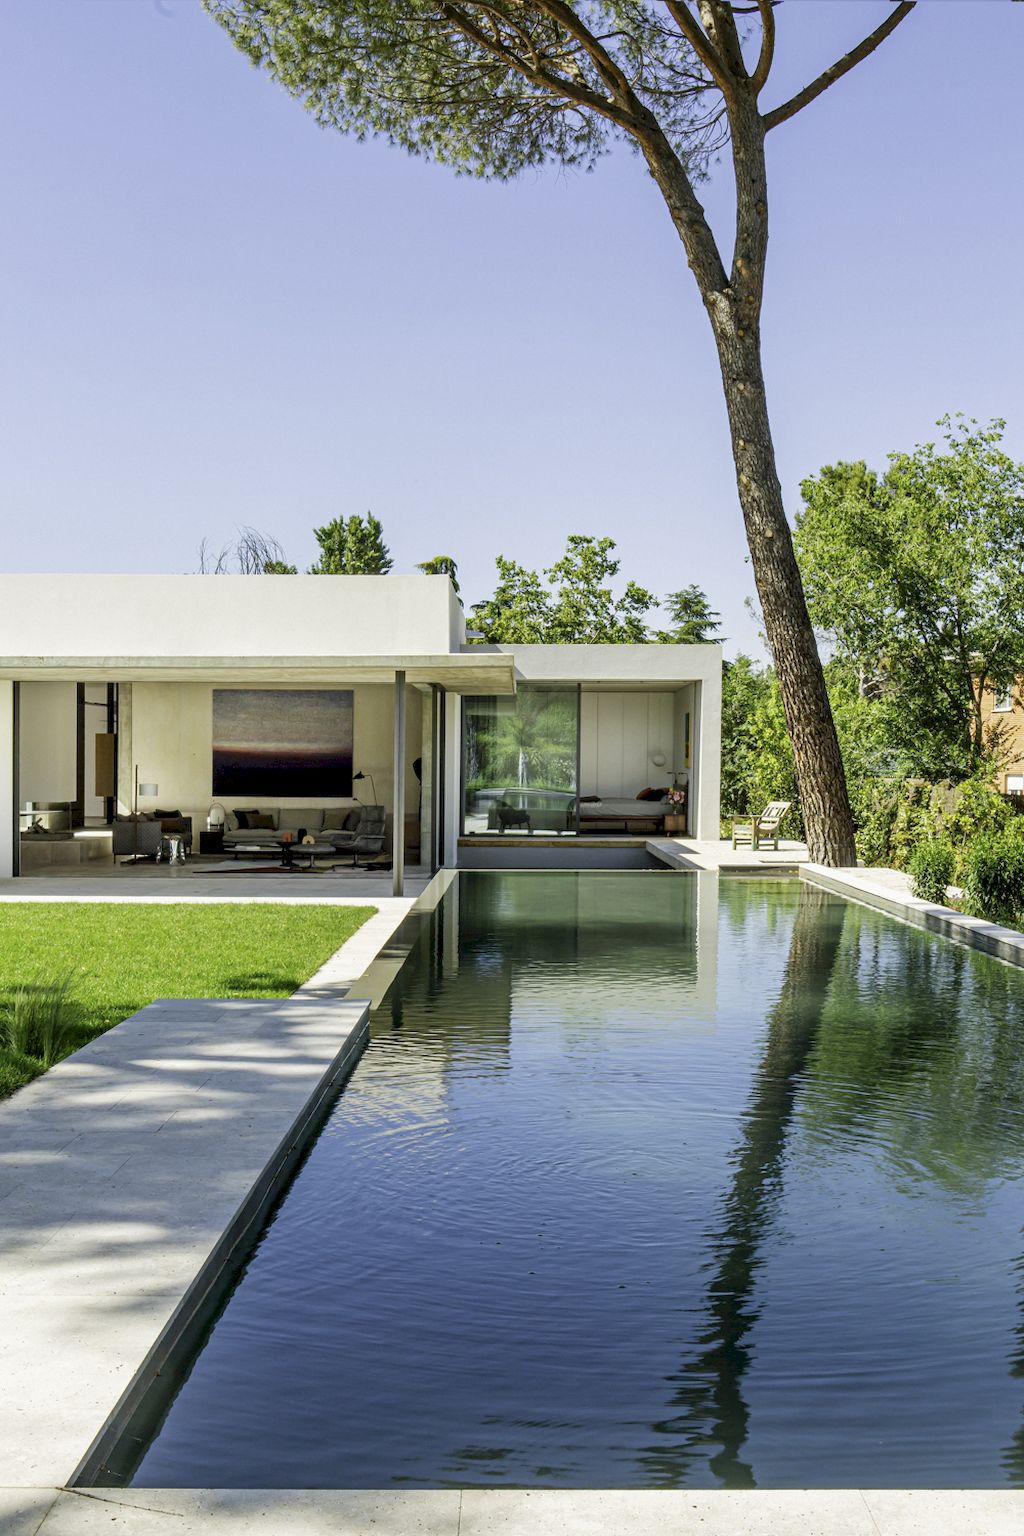 House AS, an Elegant House With Outdoor Living Connection by Ábaton